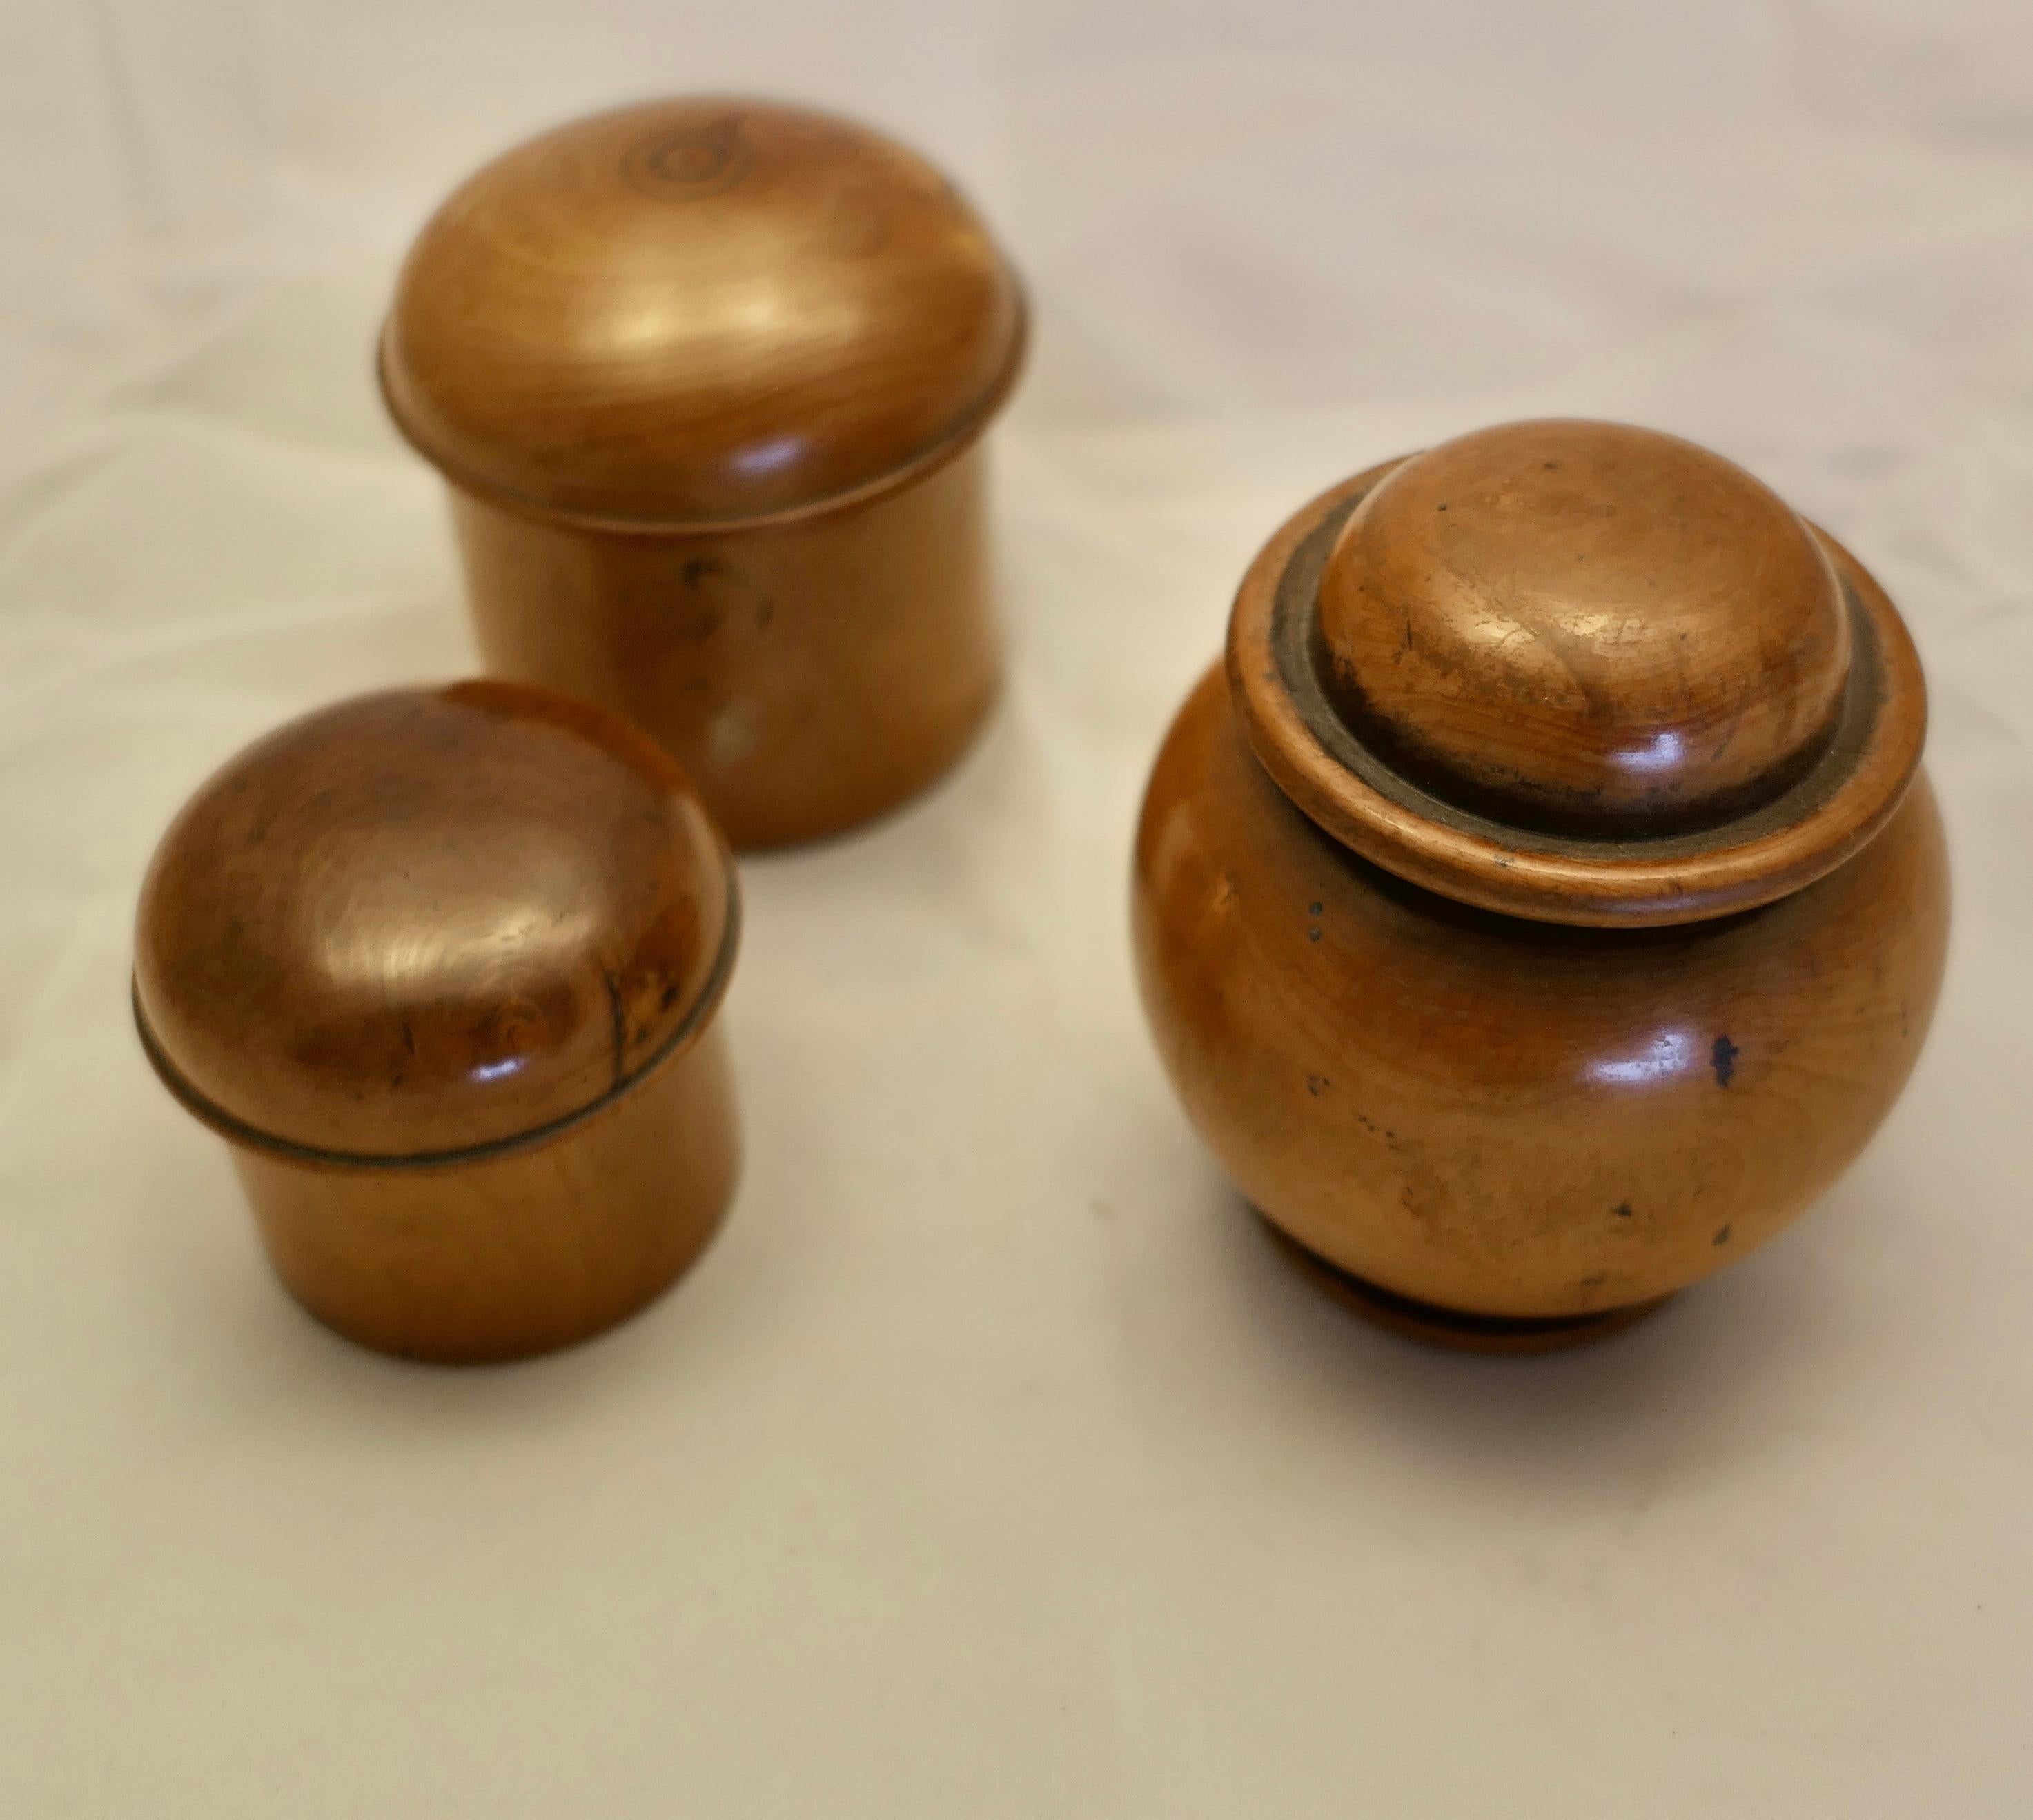 3 Hand Made Sycamore Treen Pots with Lids

The pots have a rich colour and they are very attractive
The Ali Baba style pot is the largest, it is 3.5” high and 3” in diameter

Hand made and charming
SC82